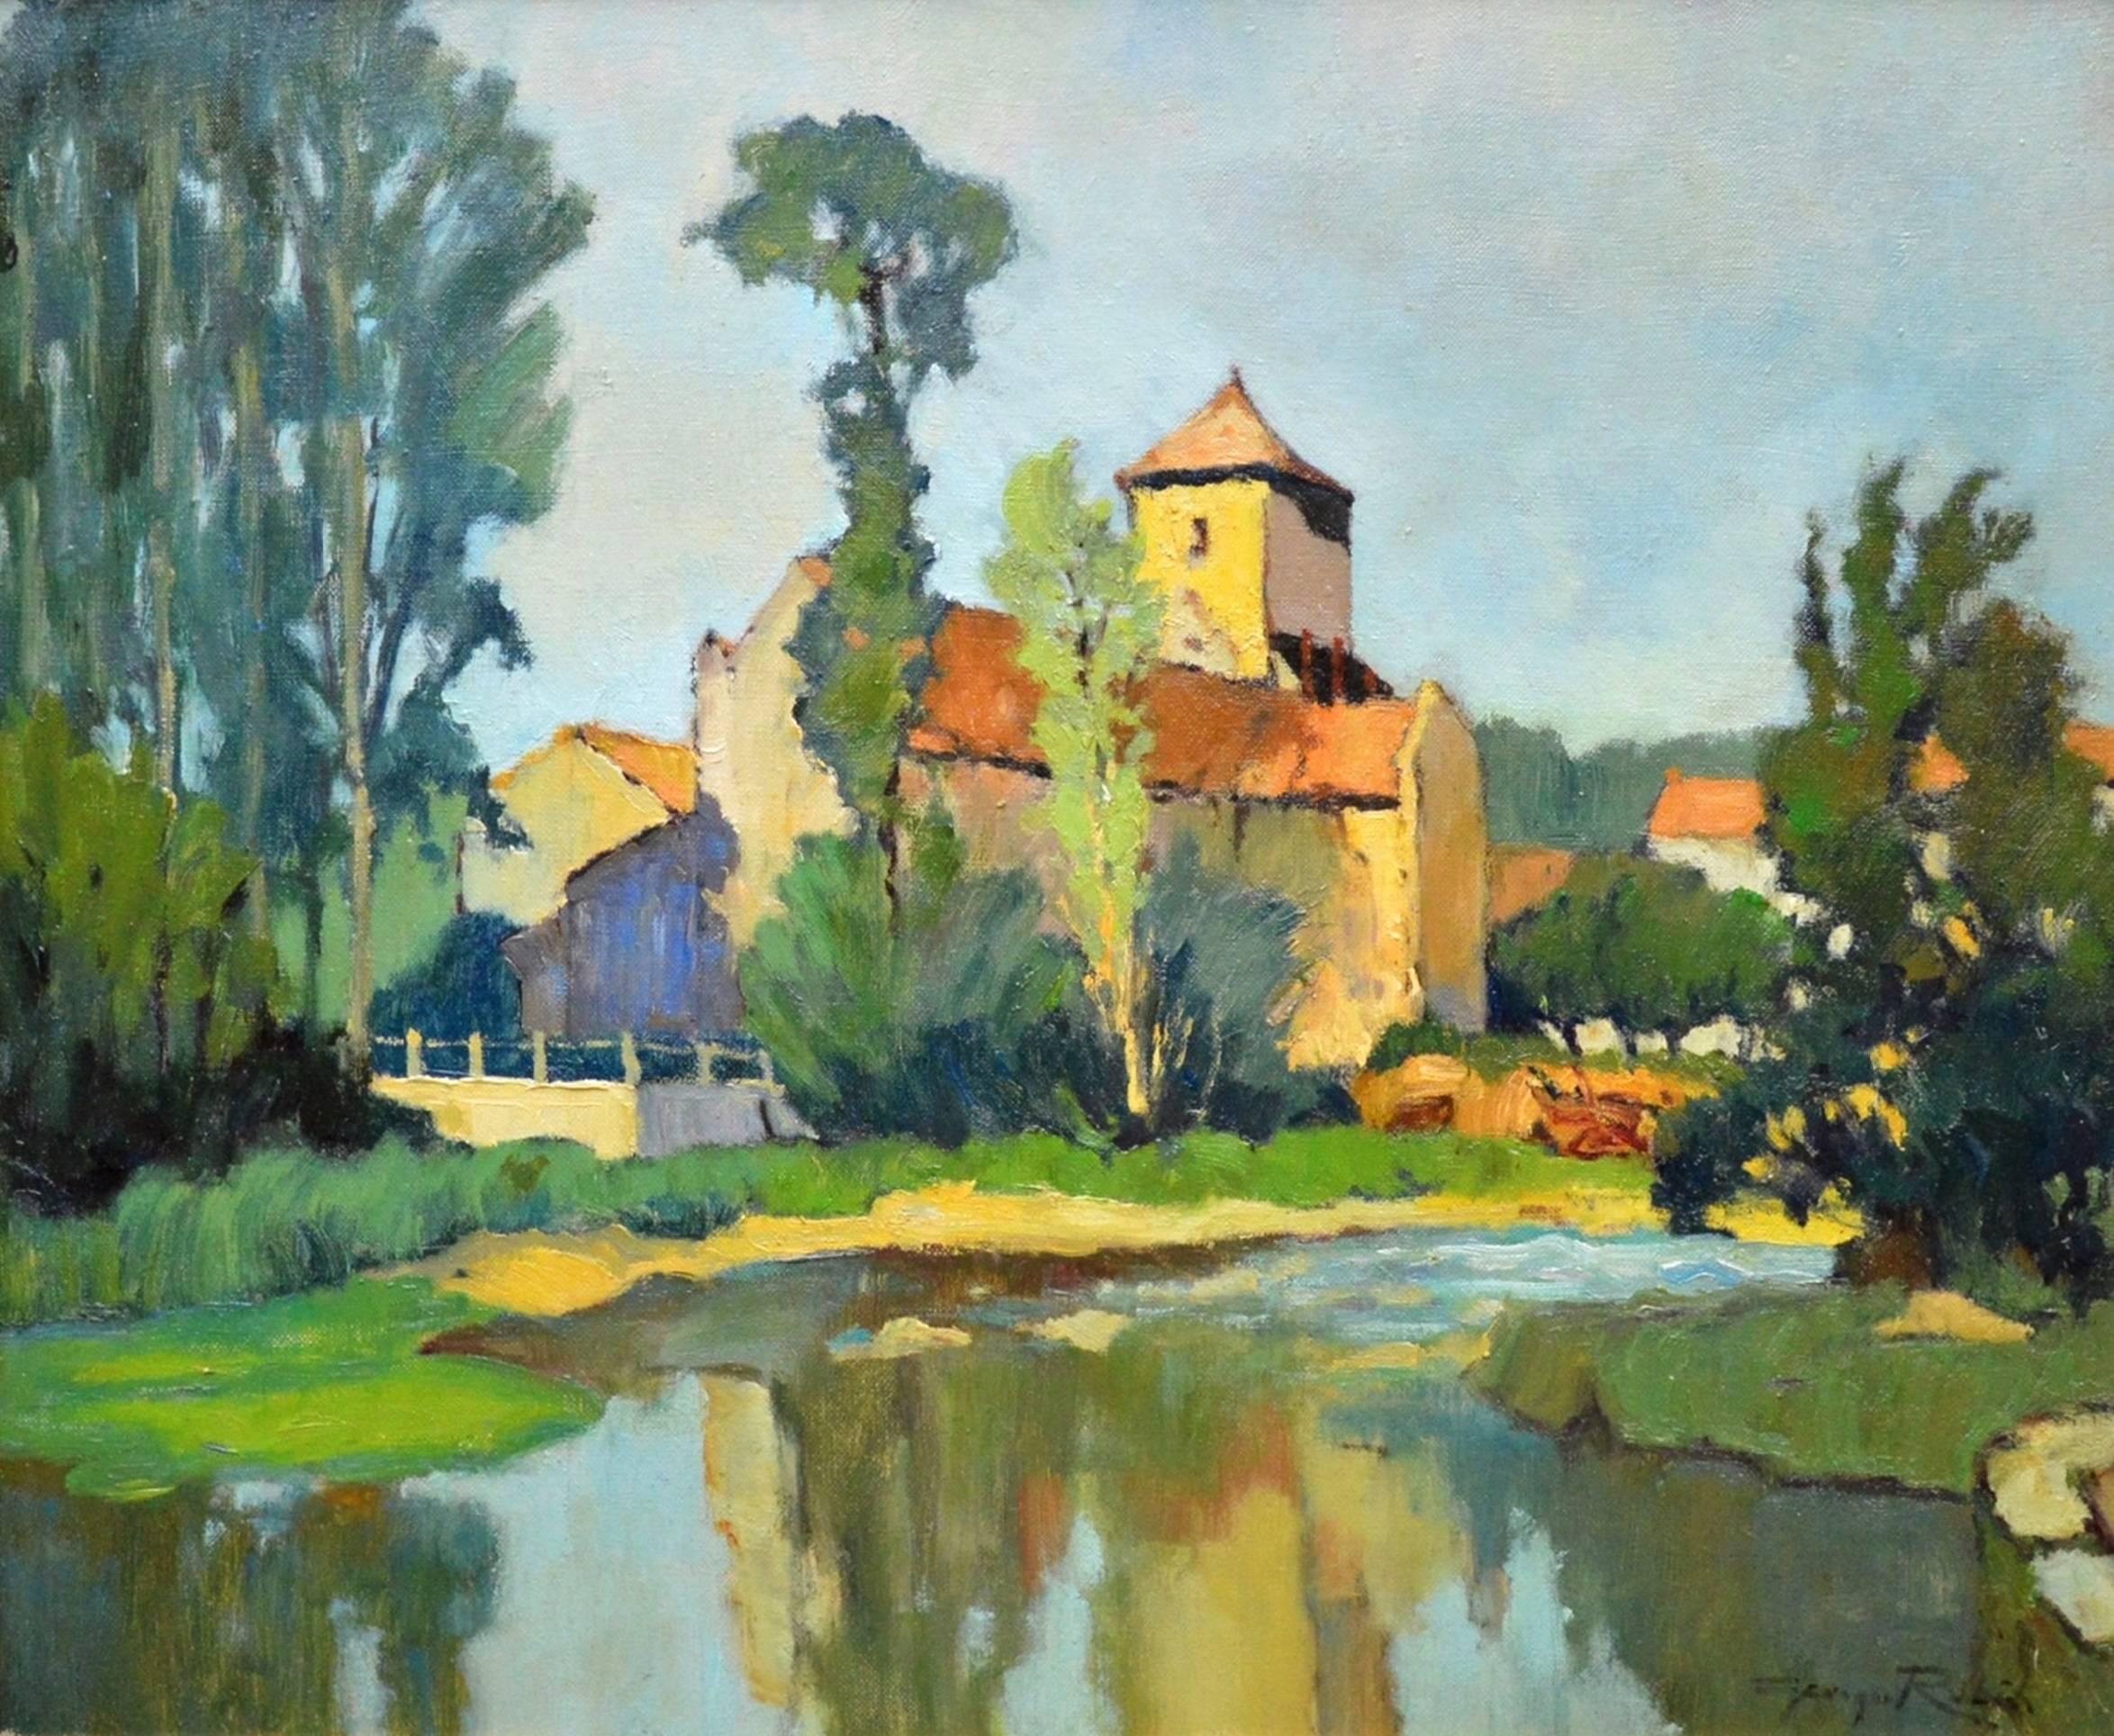 Saint-Macoux sur la Charente - French Post Impressionist Oil Painting - 1950 - Brown Landscape Painting by Georges Charles Robin